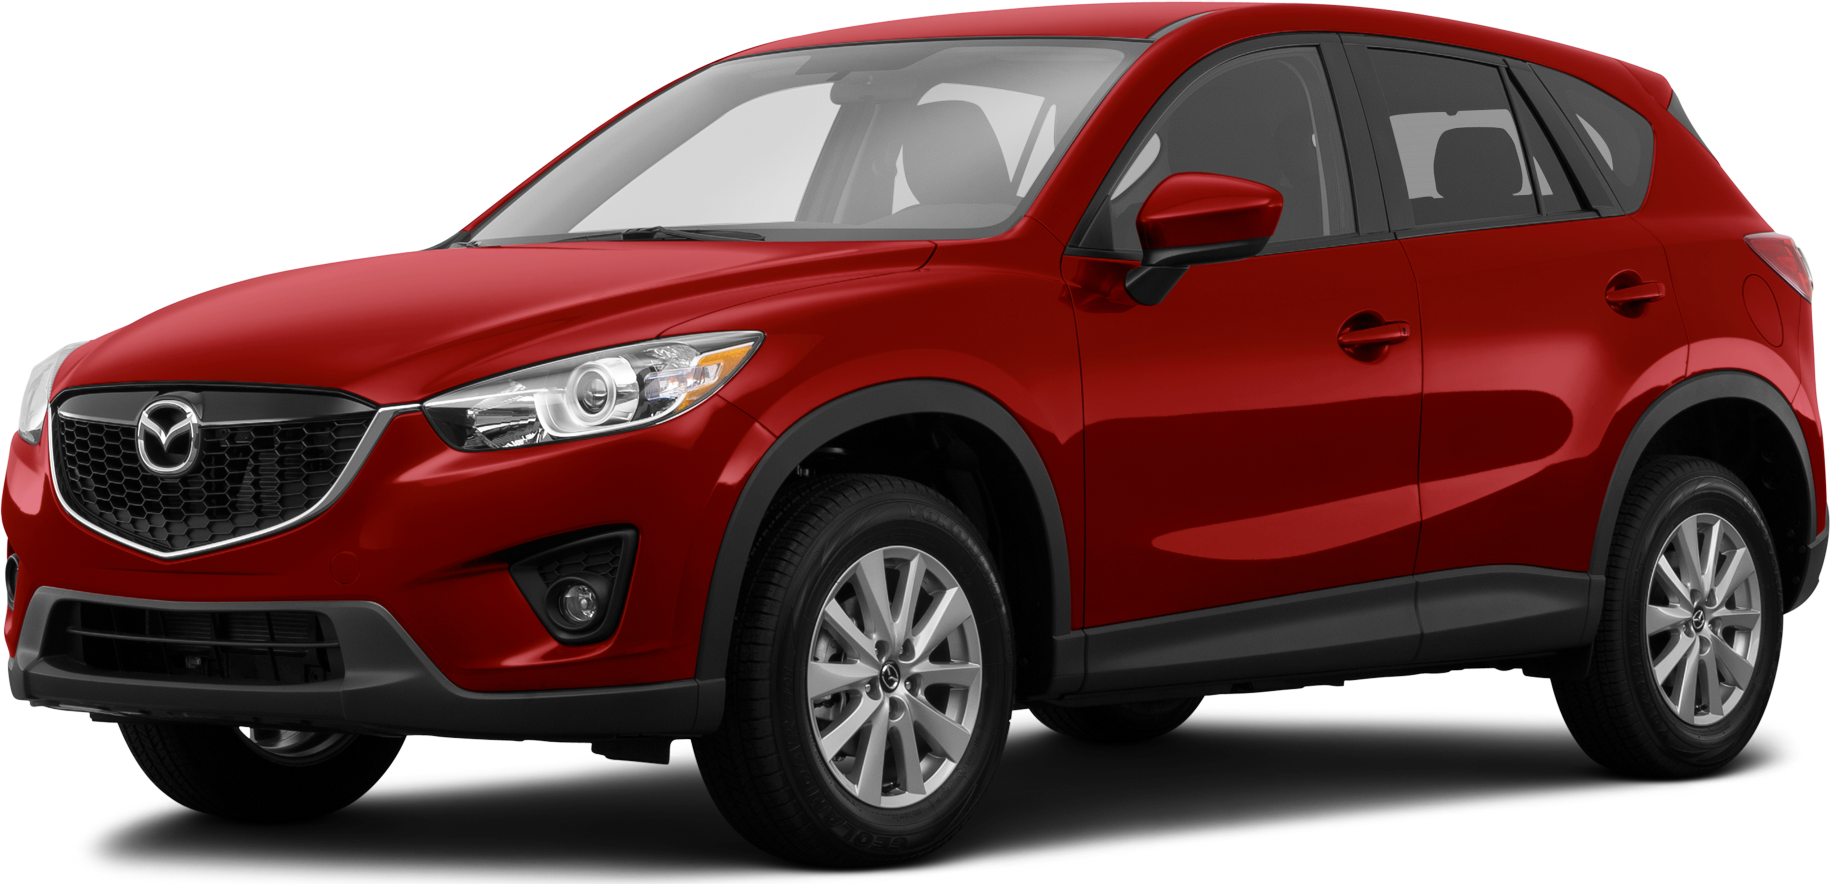 2014 MAZDA CX-5 Values & Cars for Sale | Kelley Blue Book